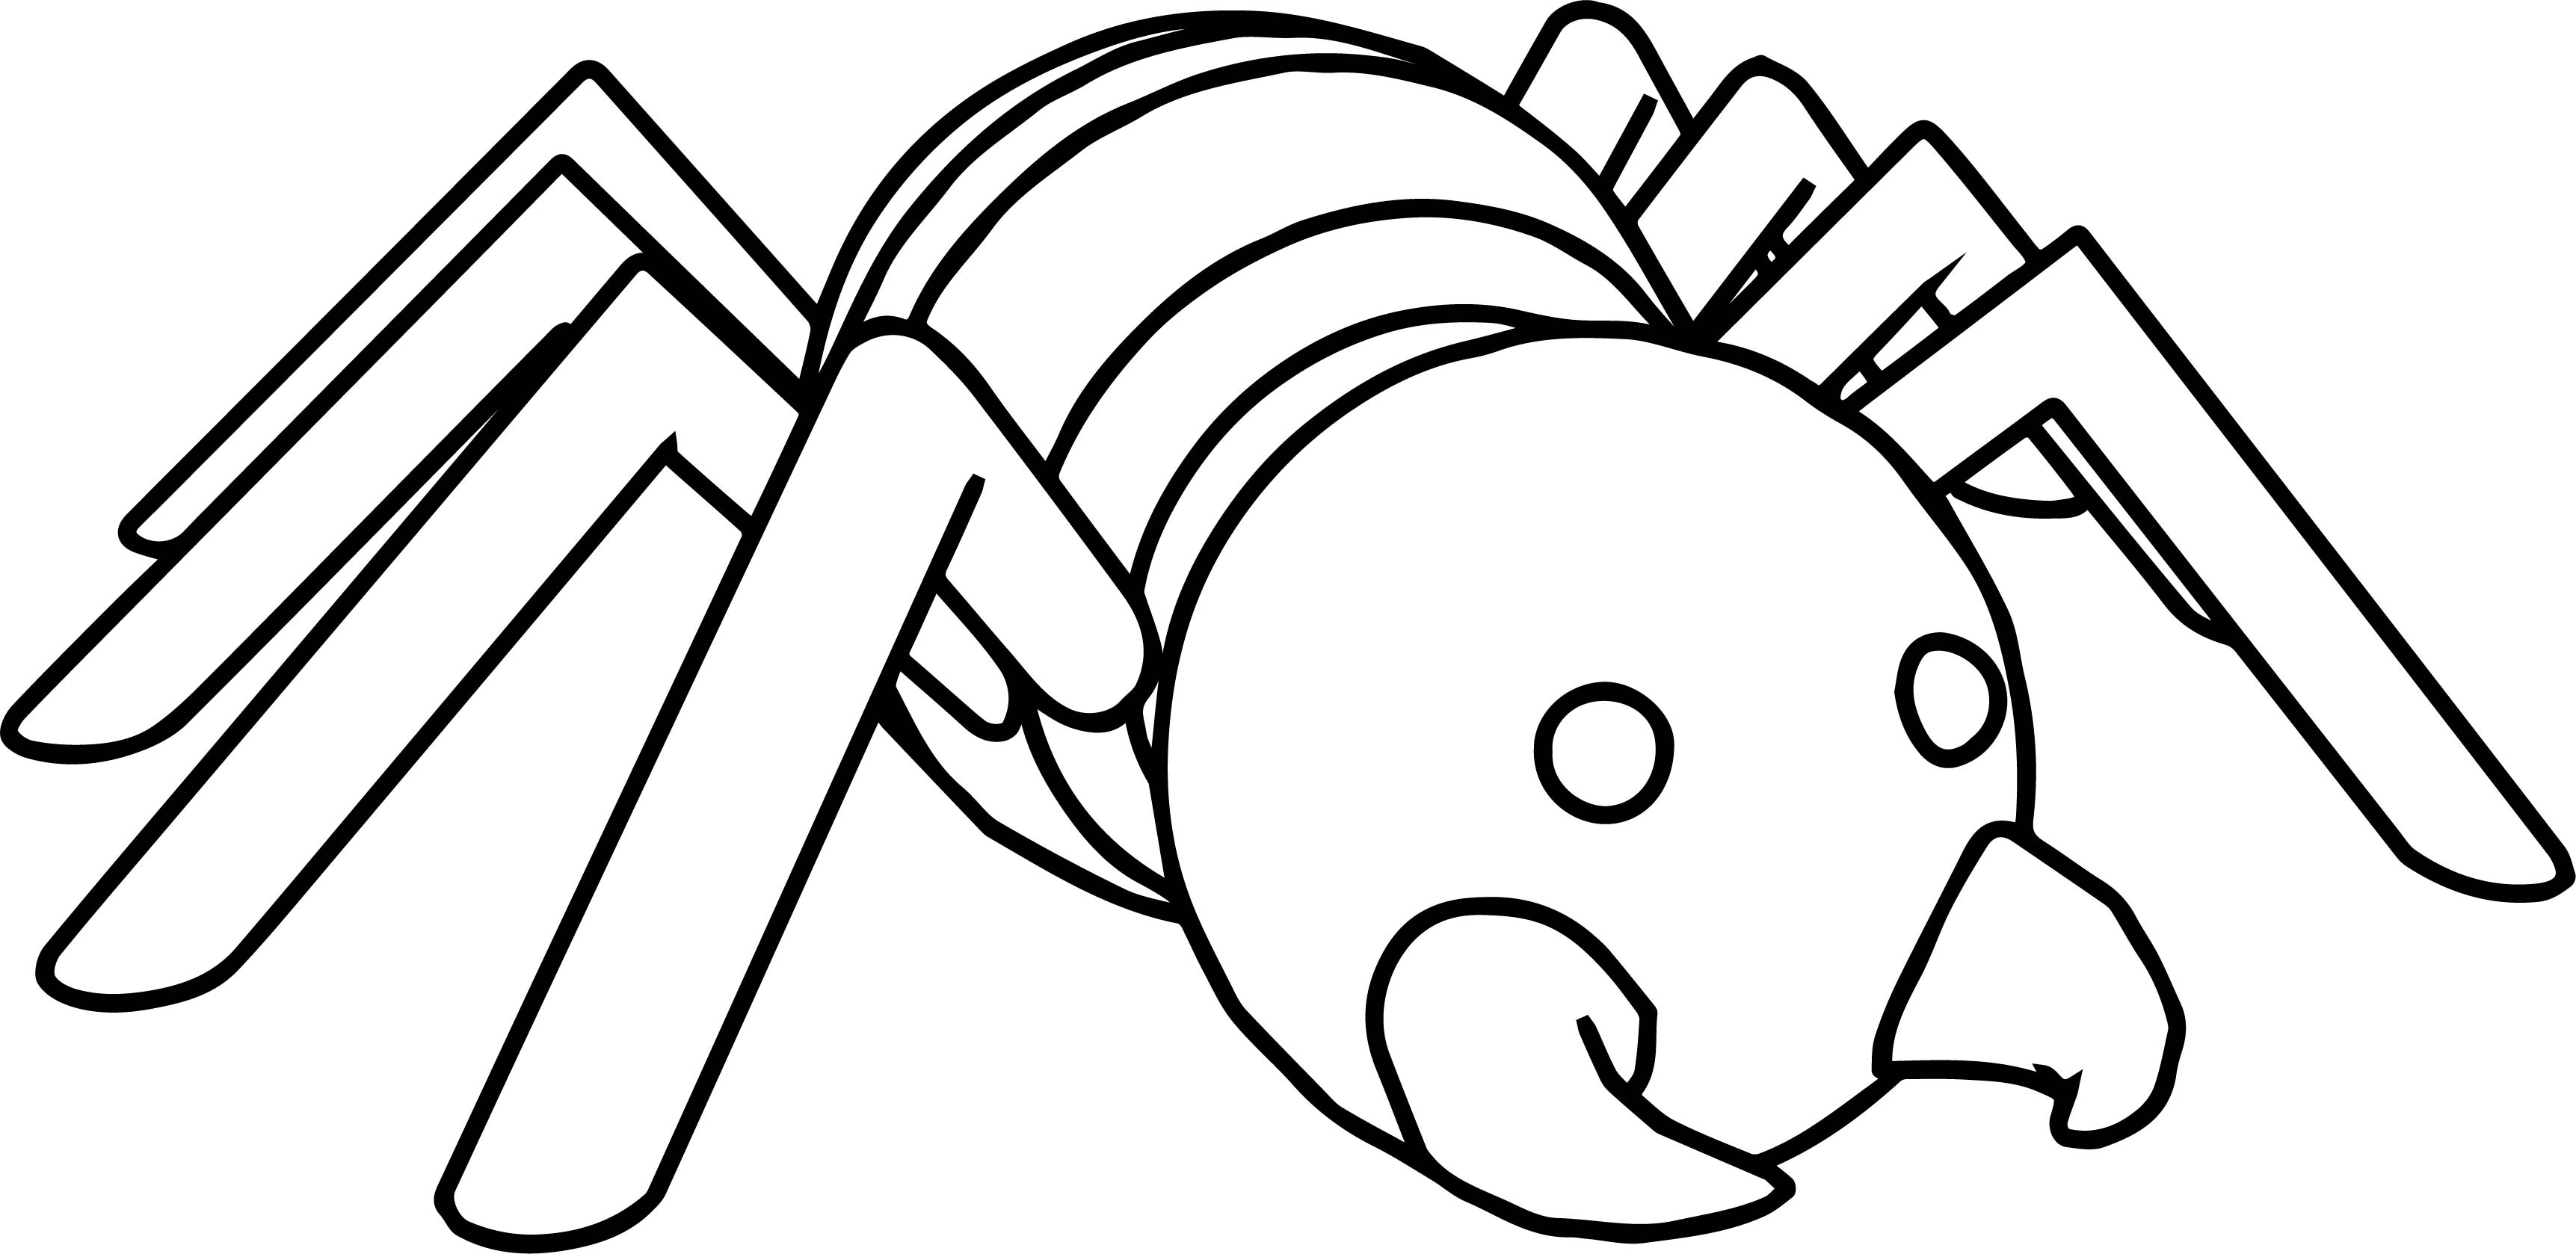 Cartoon Spider Coloring Pages at GetDrawings | Free download